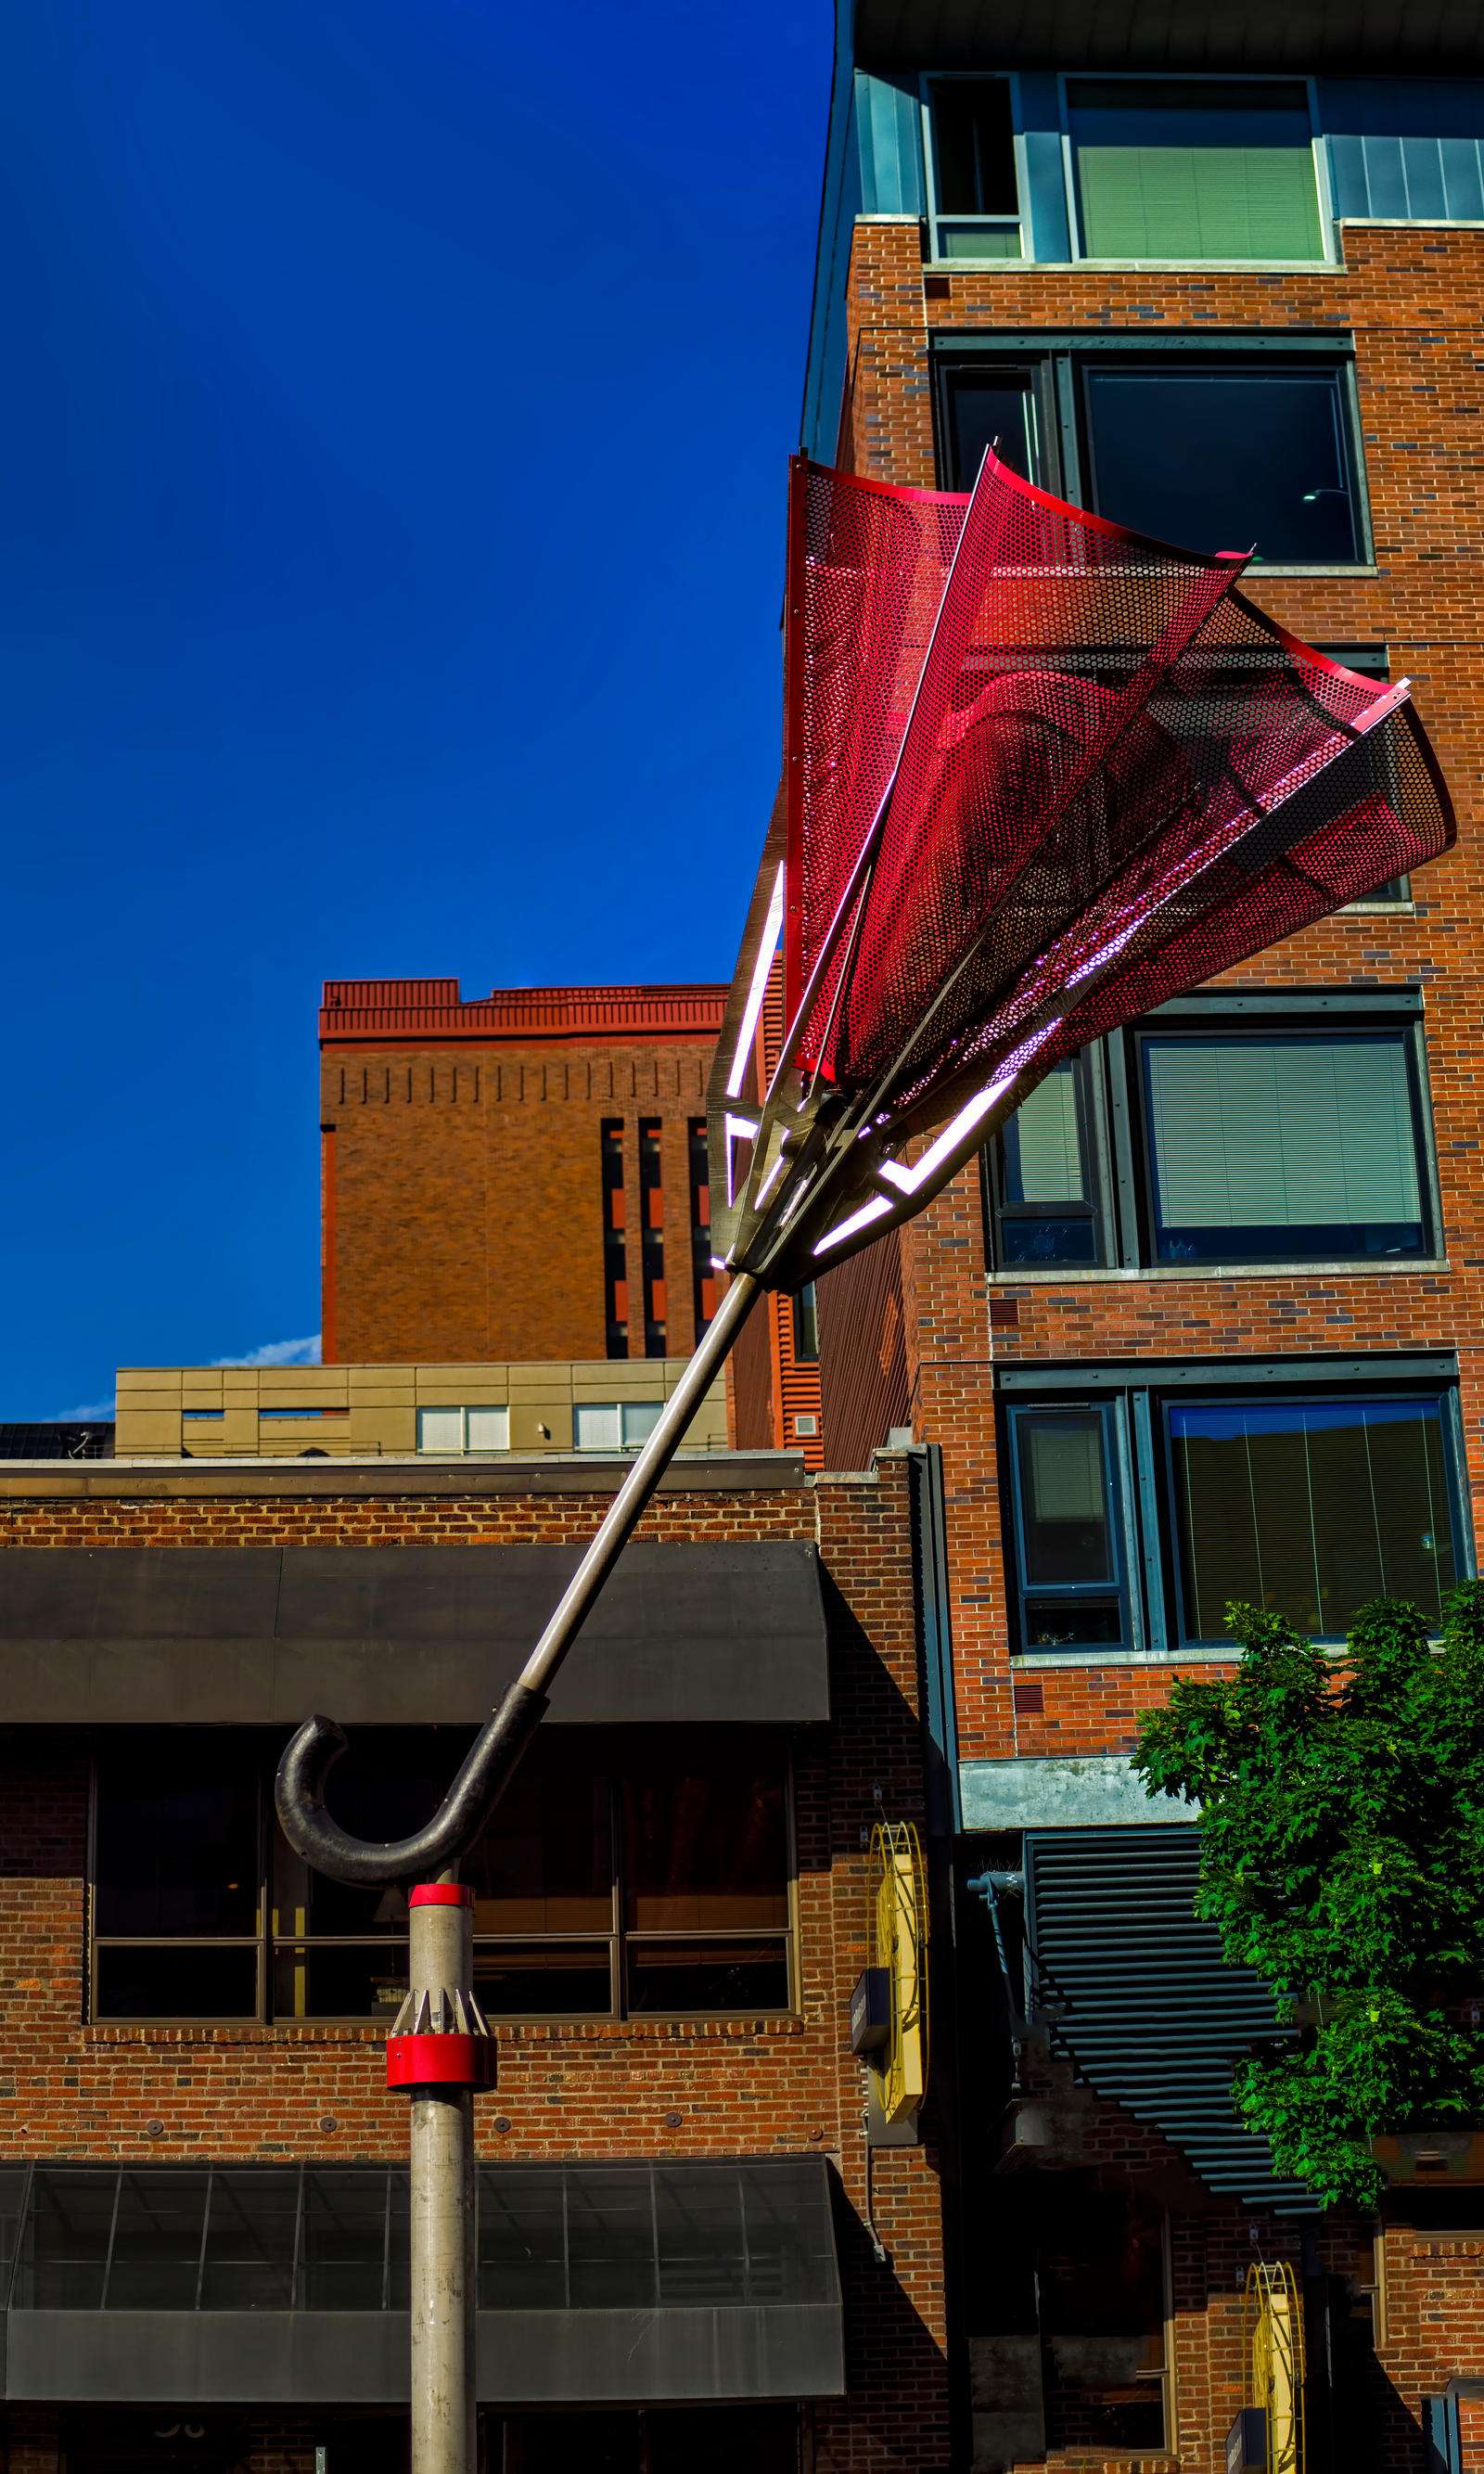 umbrella in seattle by mackingster d681bni